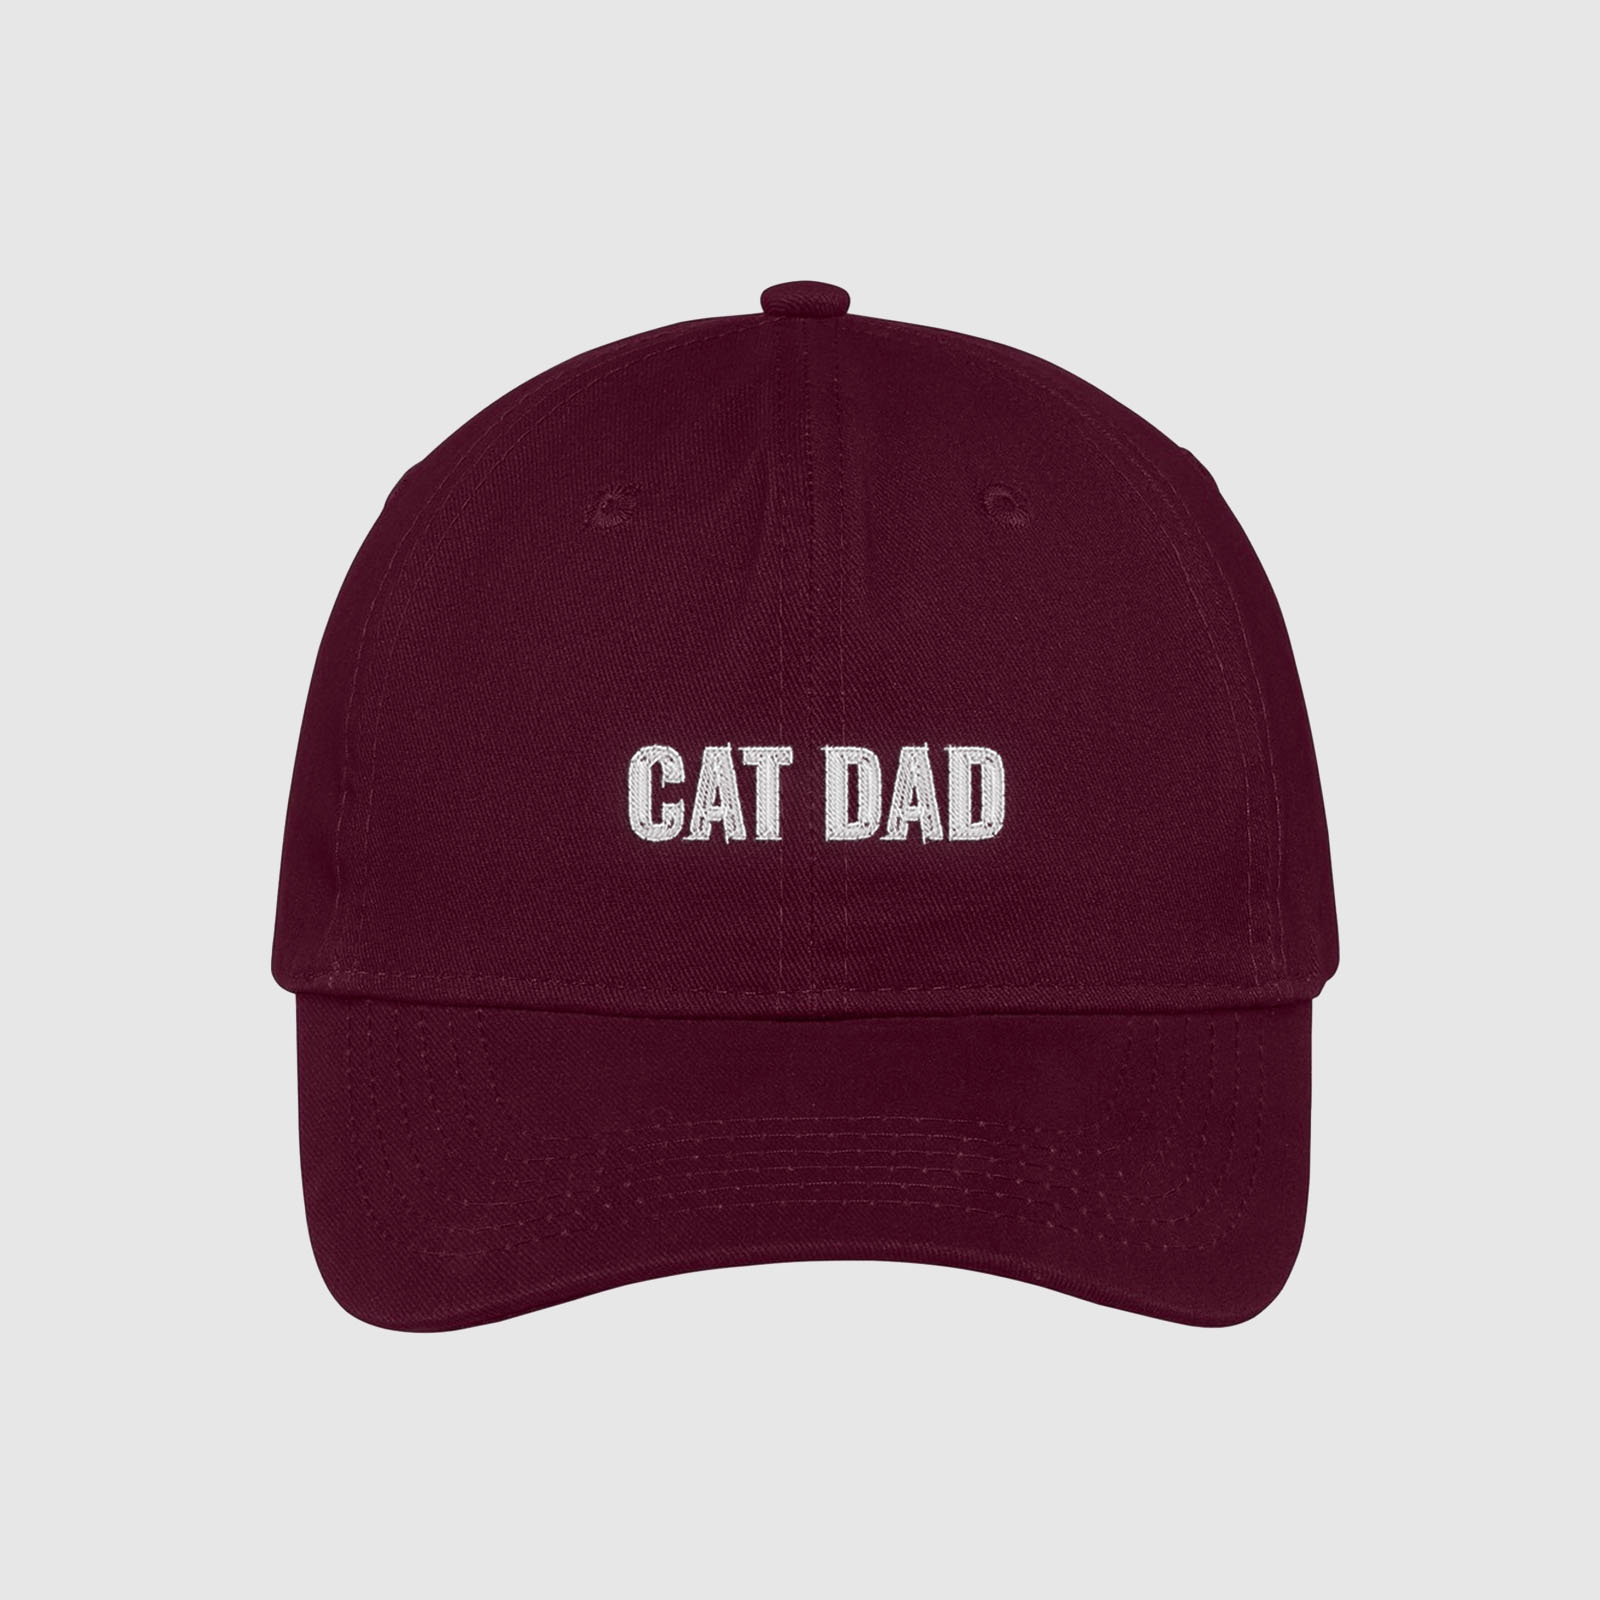 Maroon cat dad hat embroidered with white text